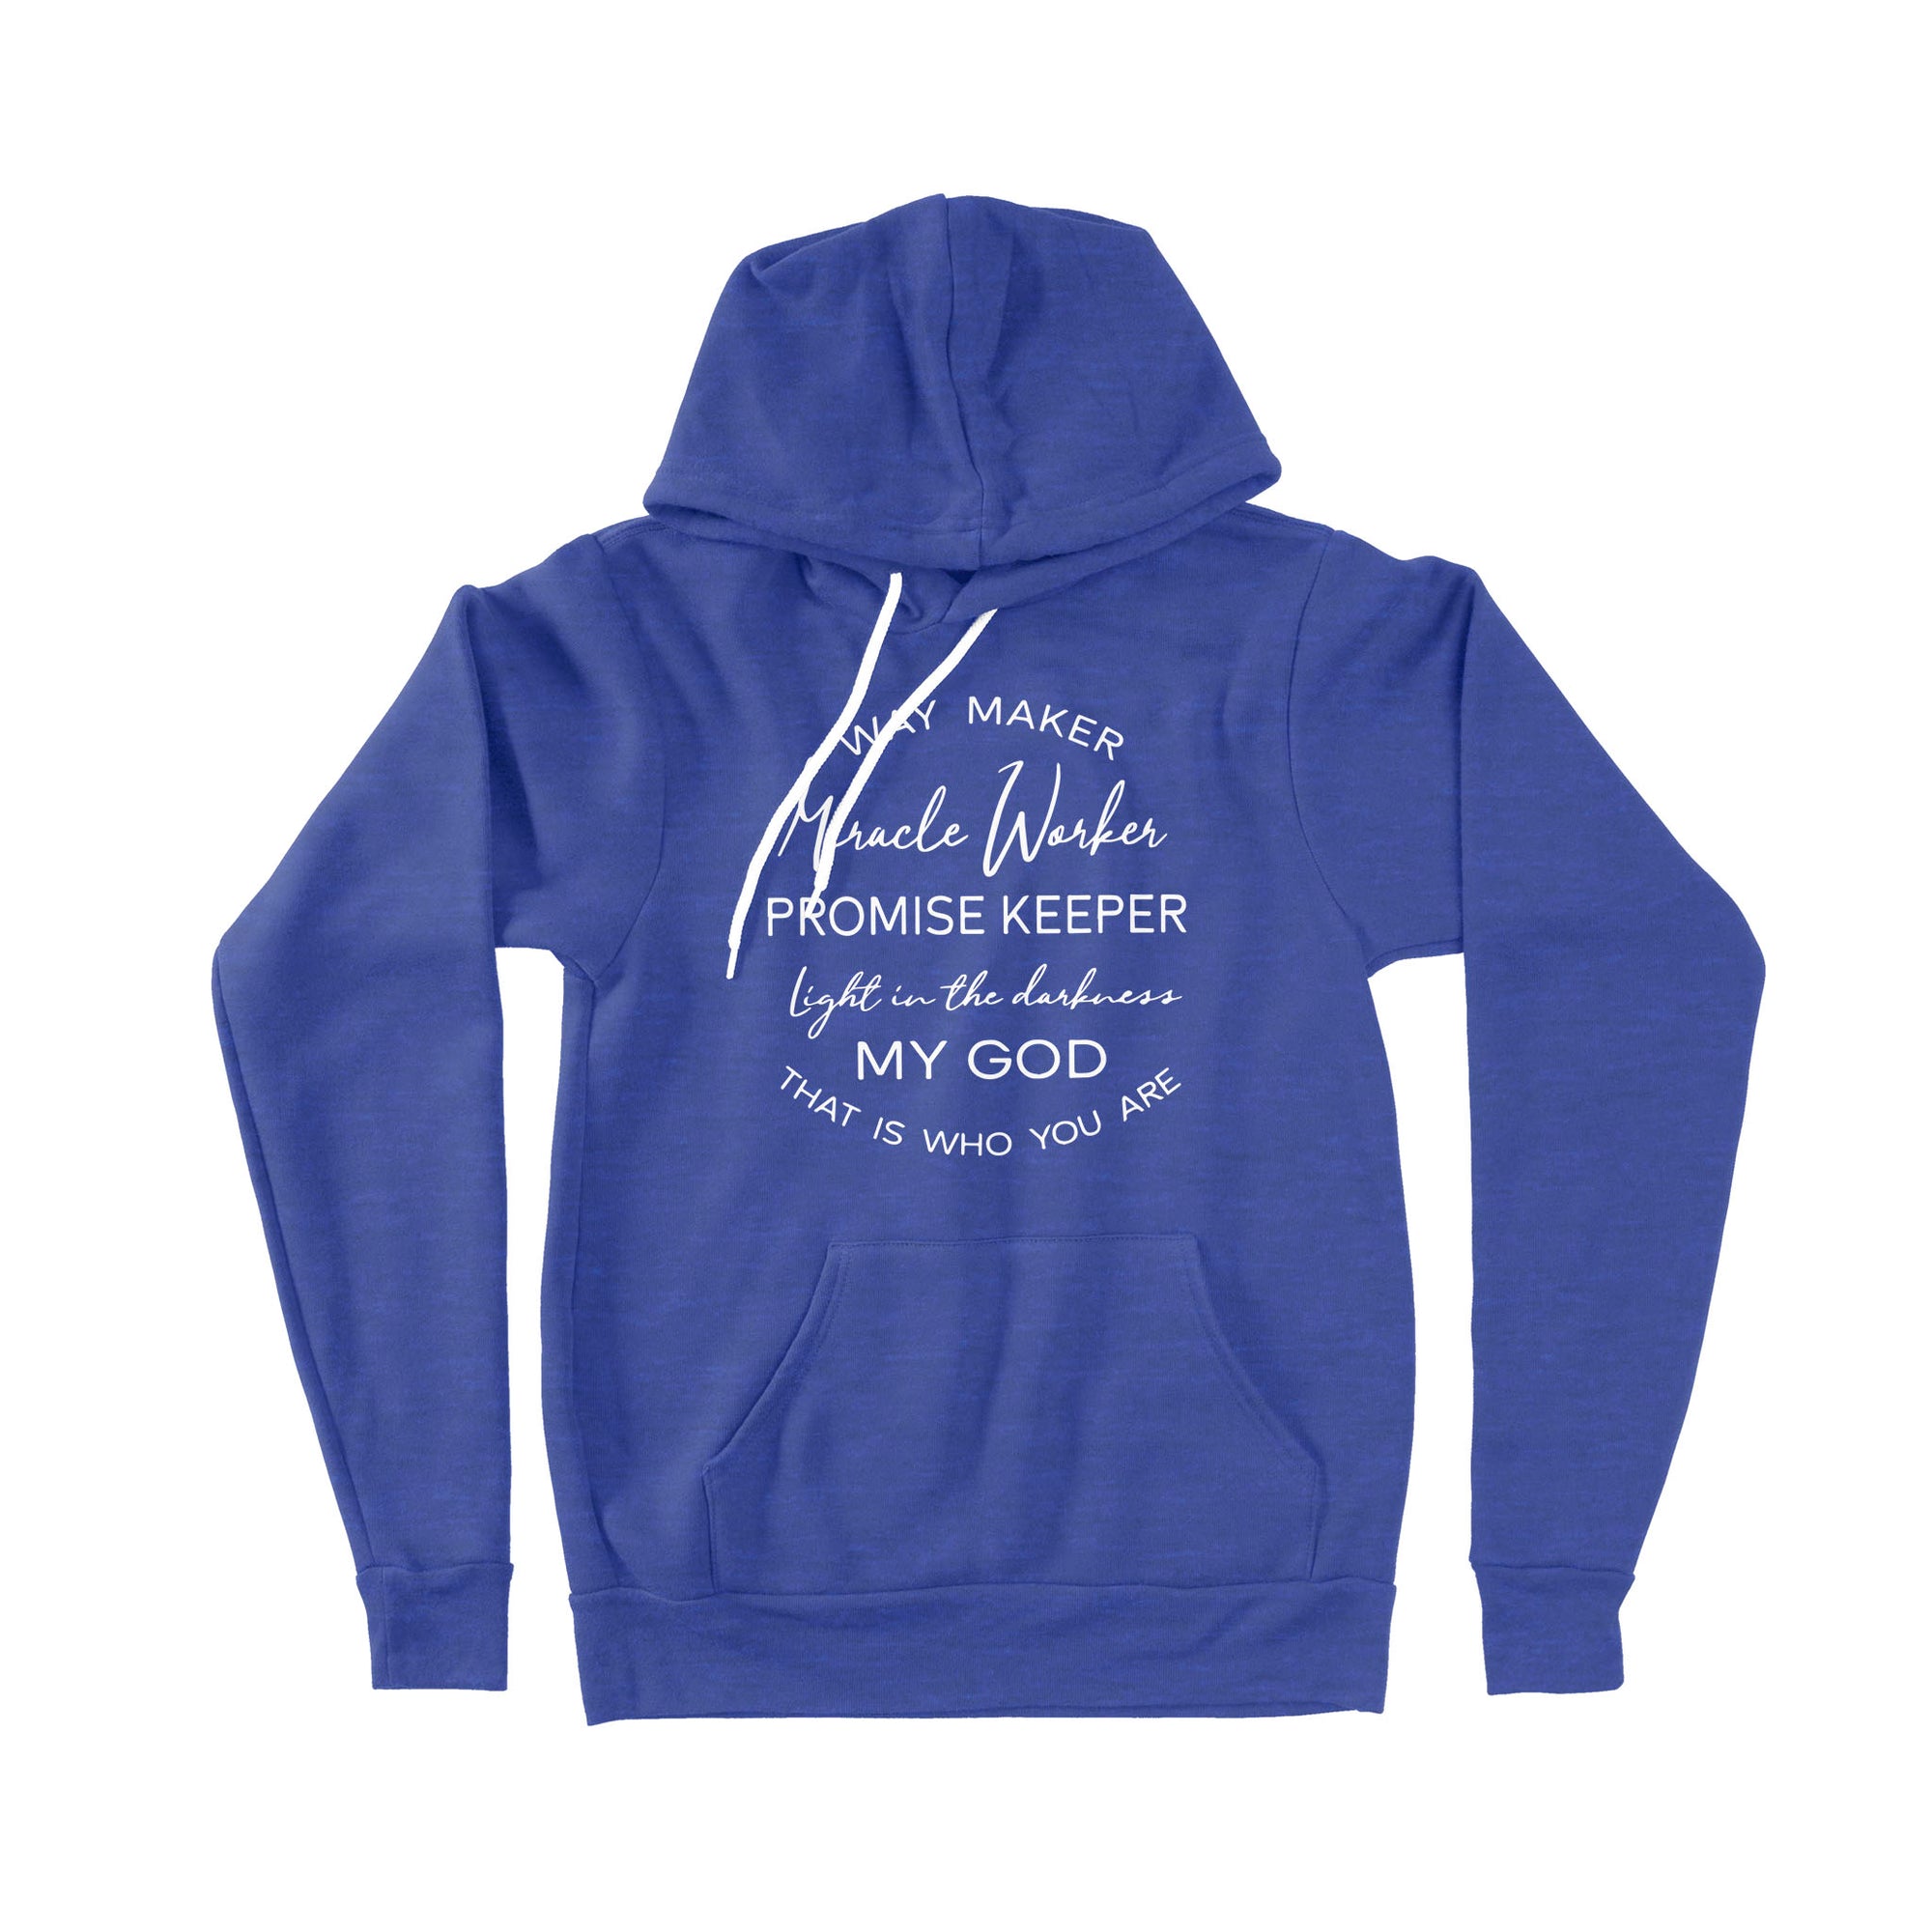 Way Maker Miracle Worker Promise Keeper Light In The Darkness My God That Is Who You Are - Premium Hoodie